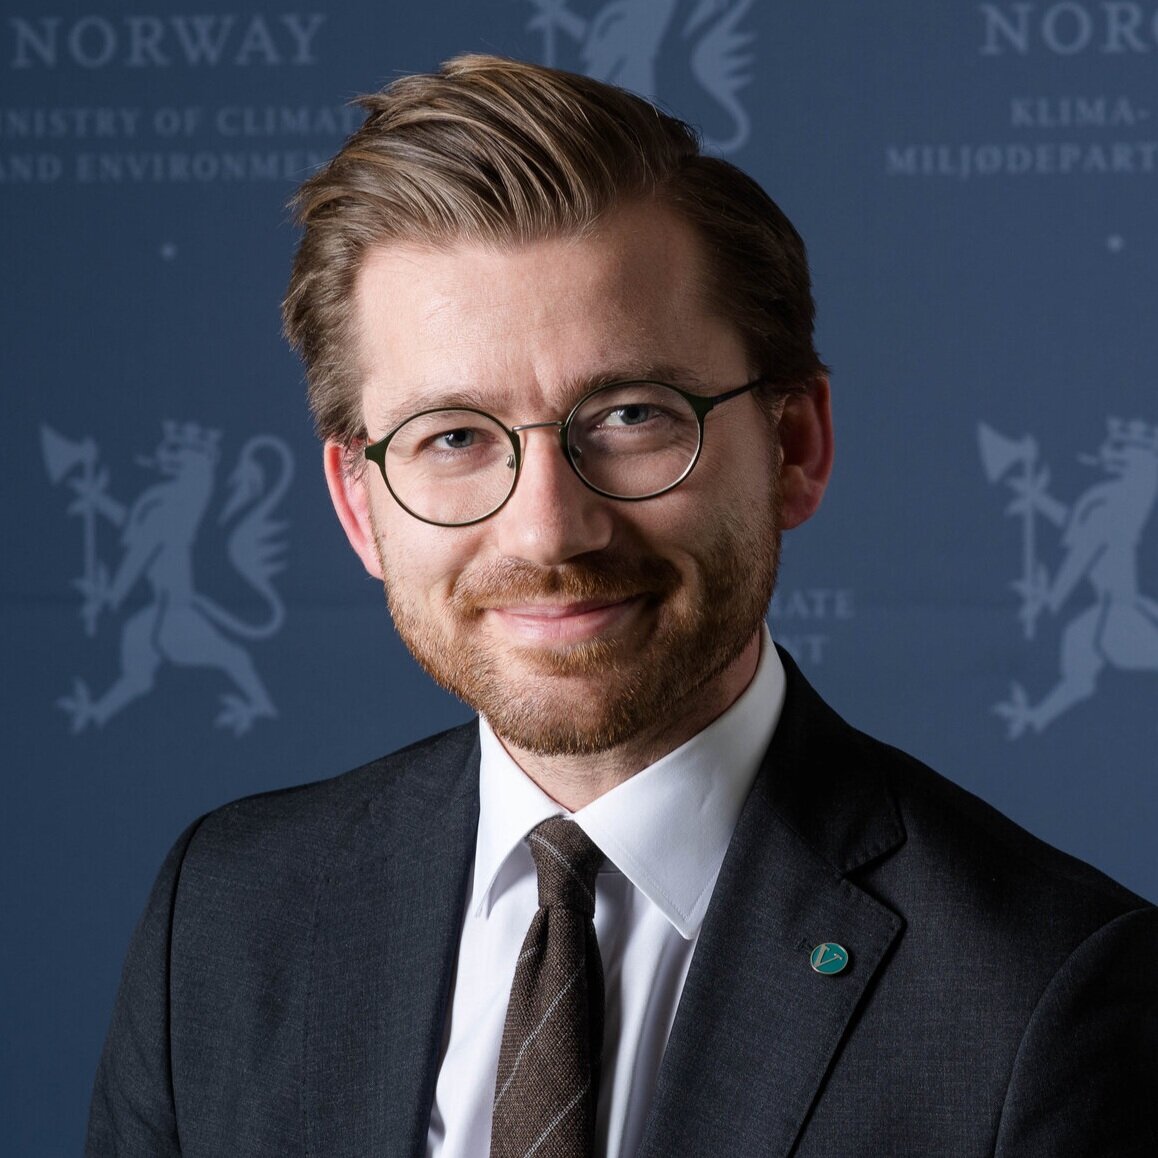 Minister Sveinung Rotevatn (Copy)